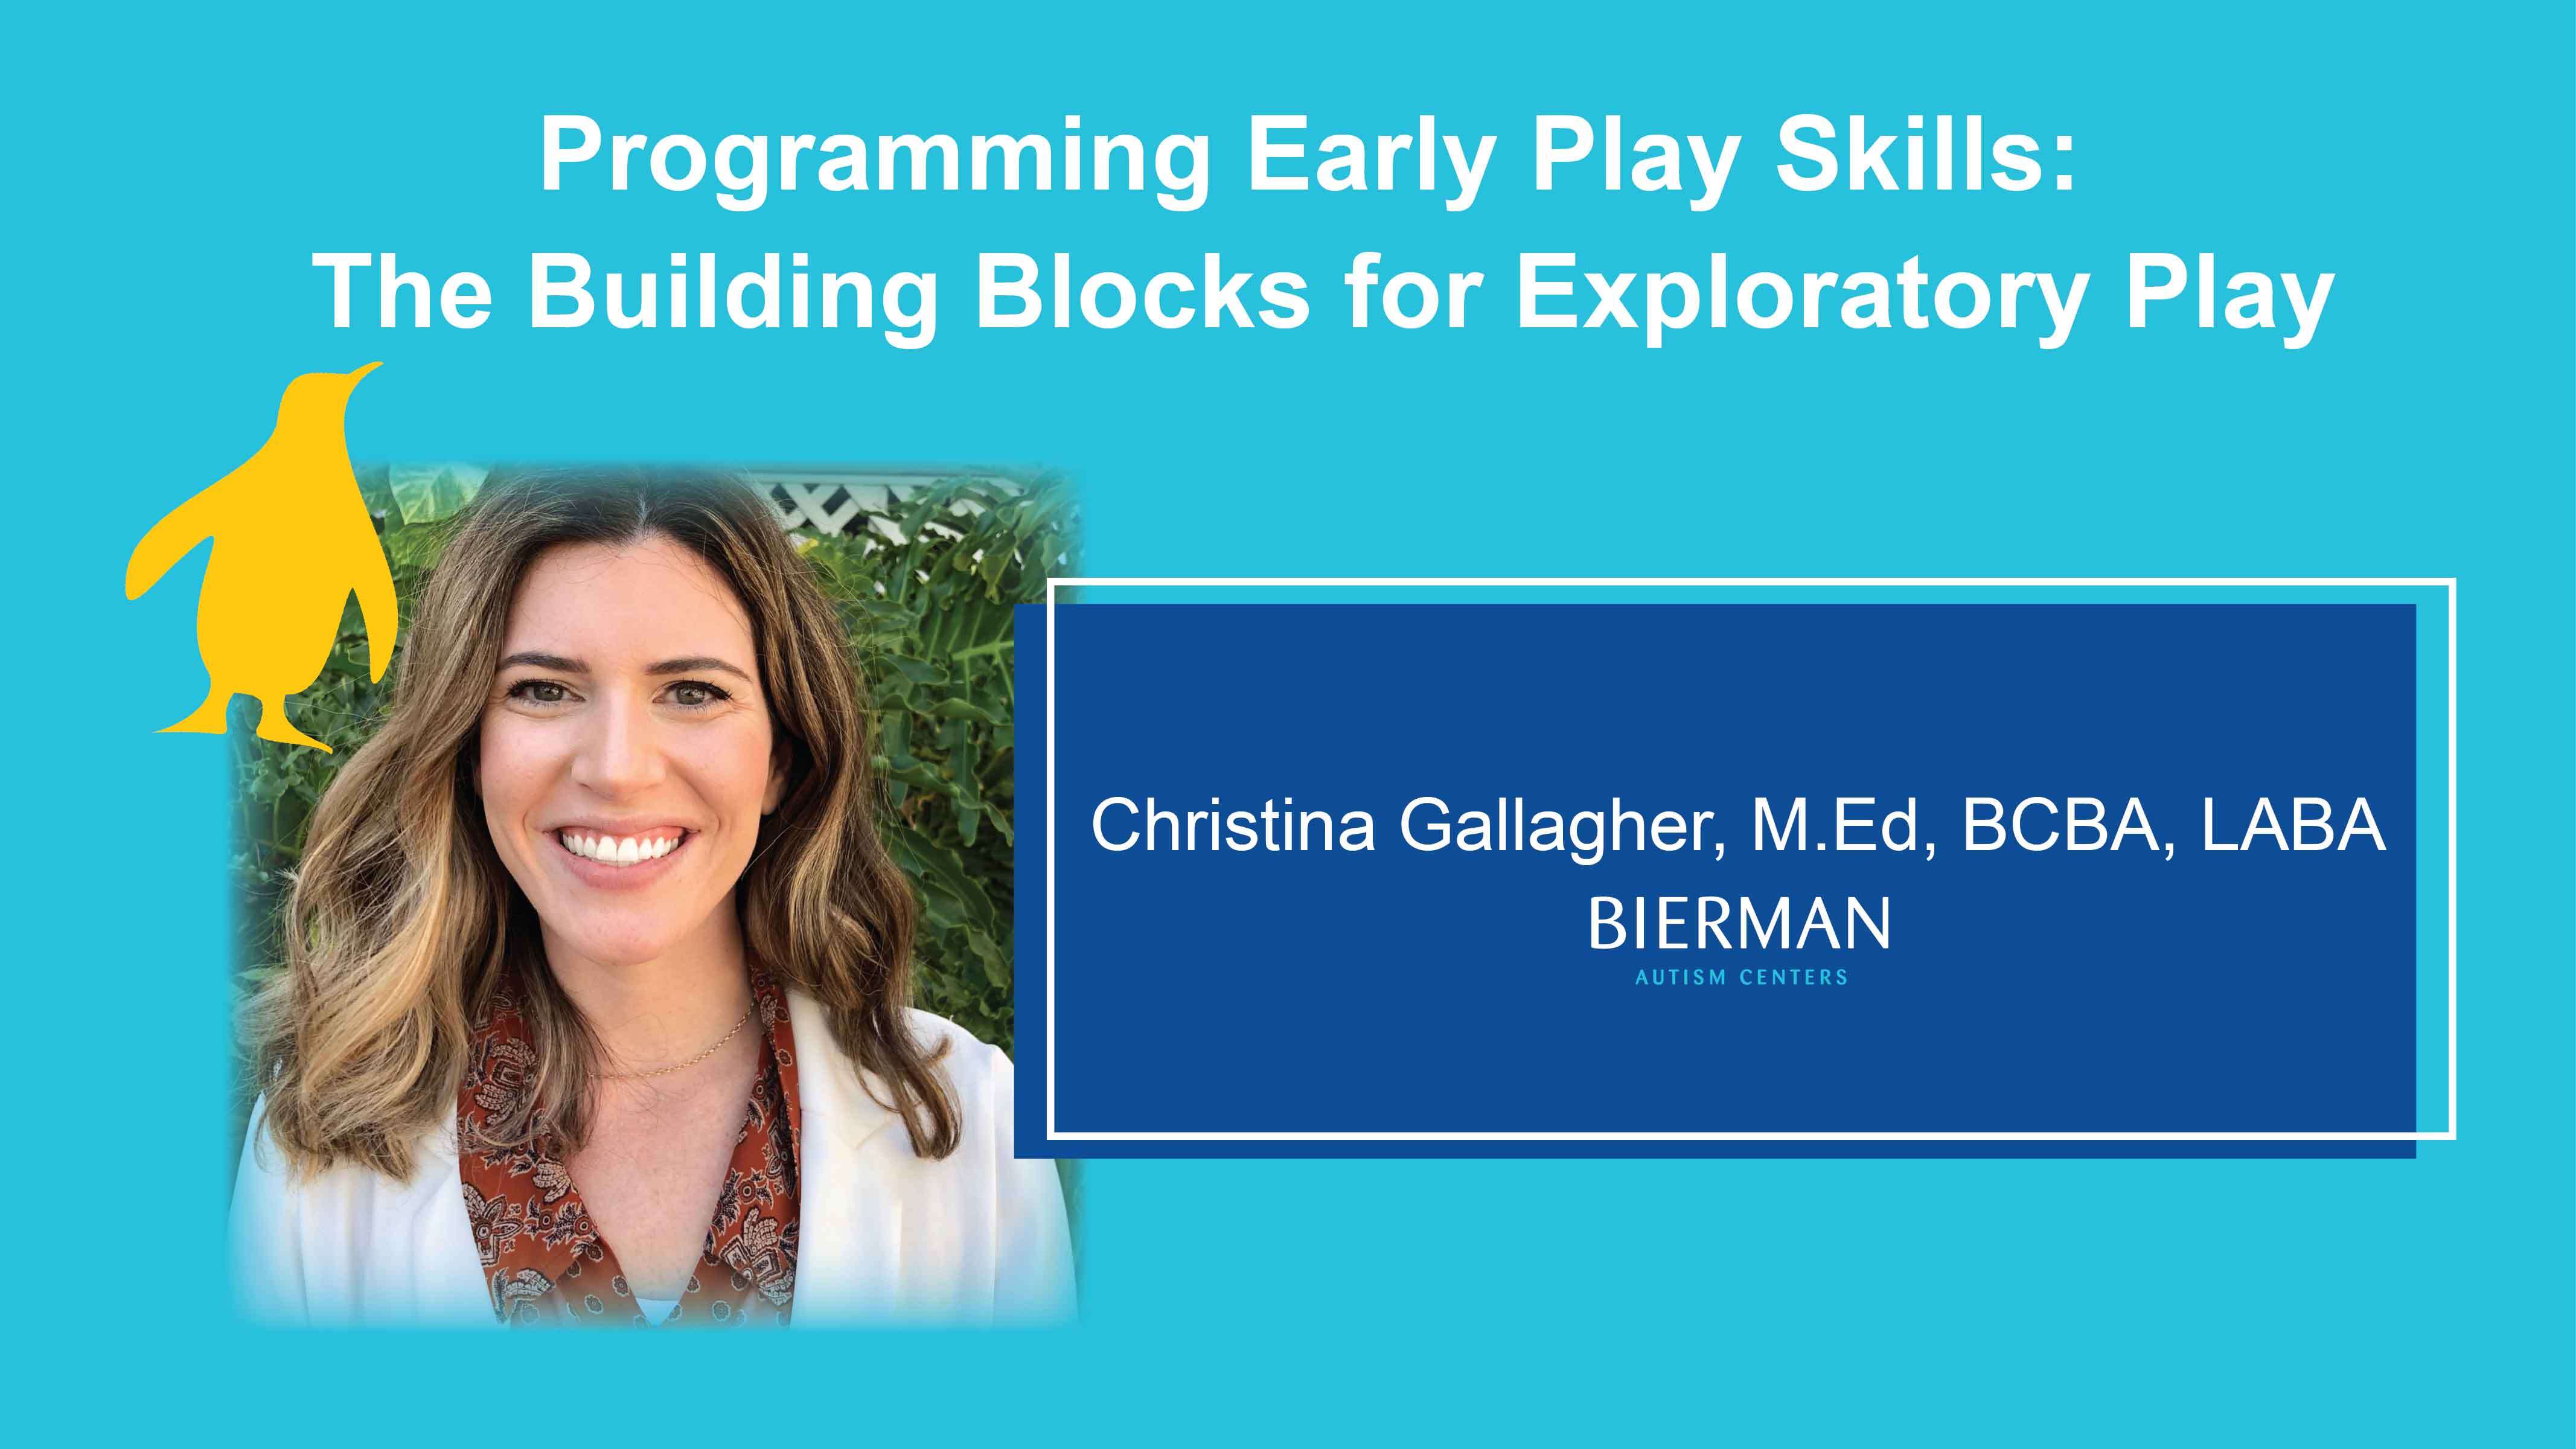 Programming Early Play Skills: The Building Blocks for Exploratory Play